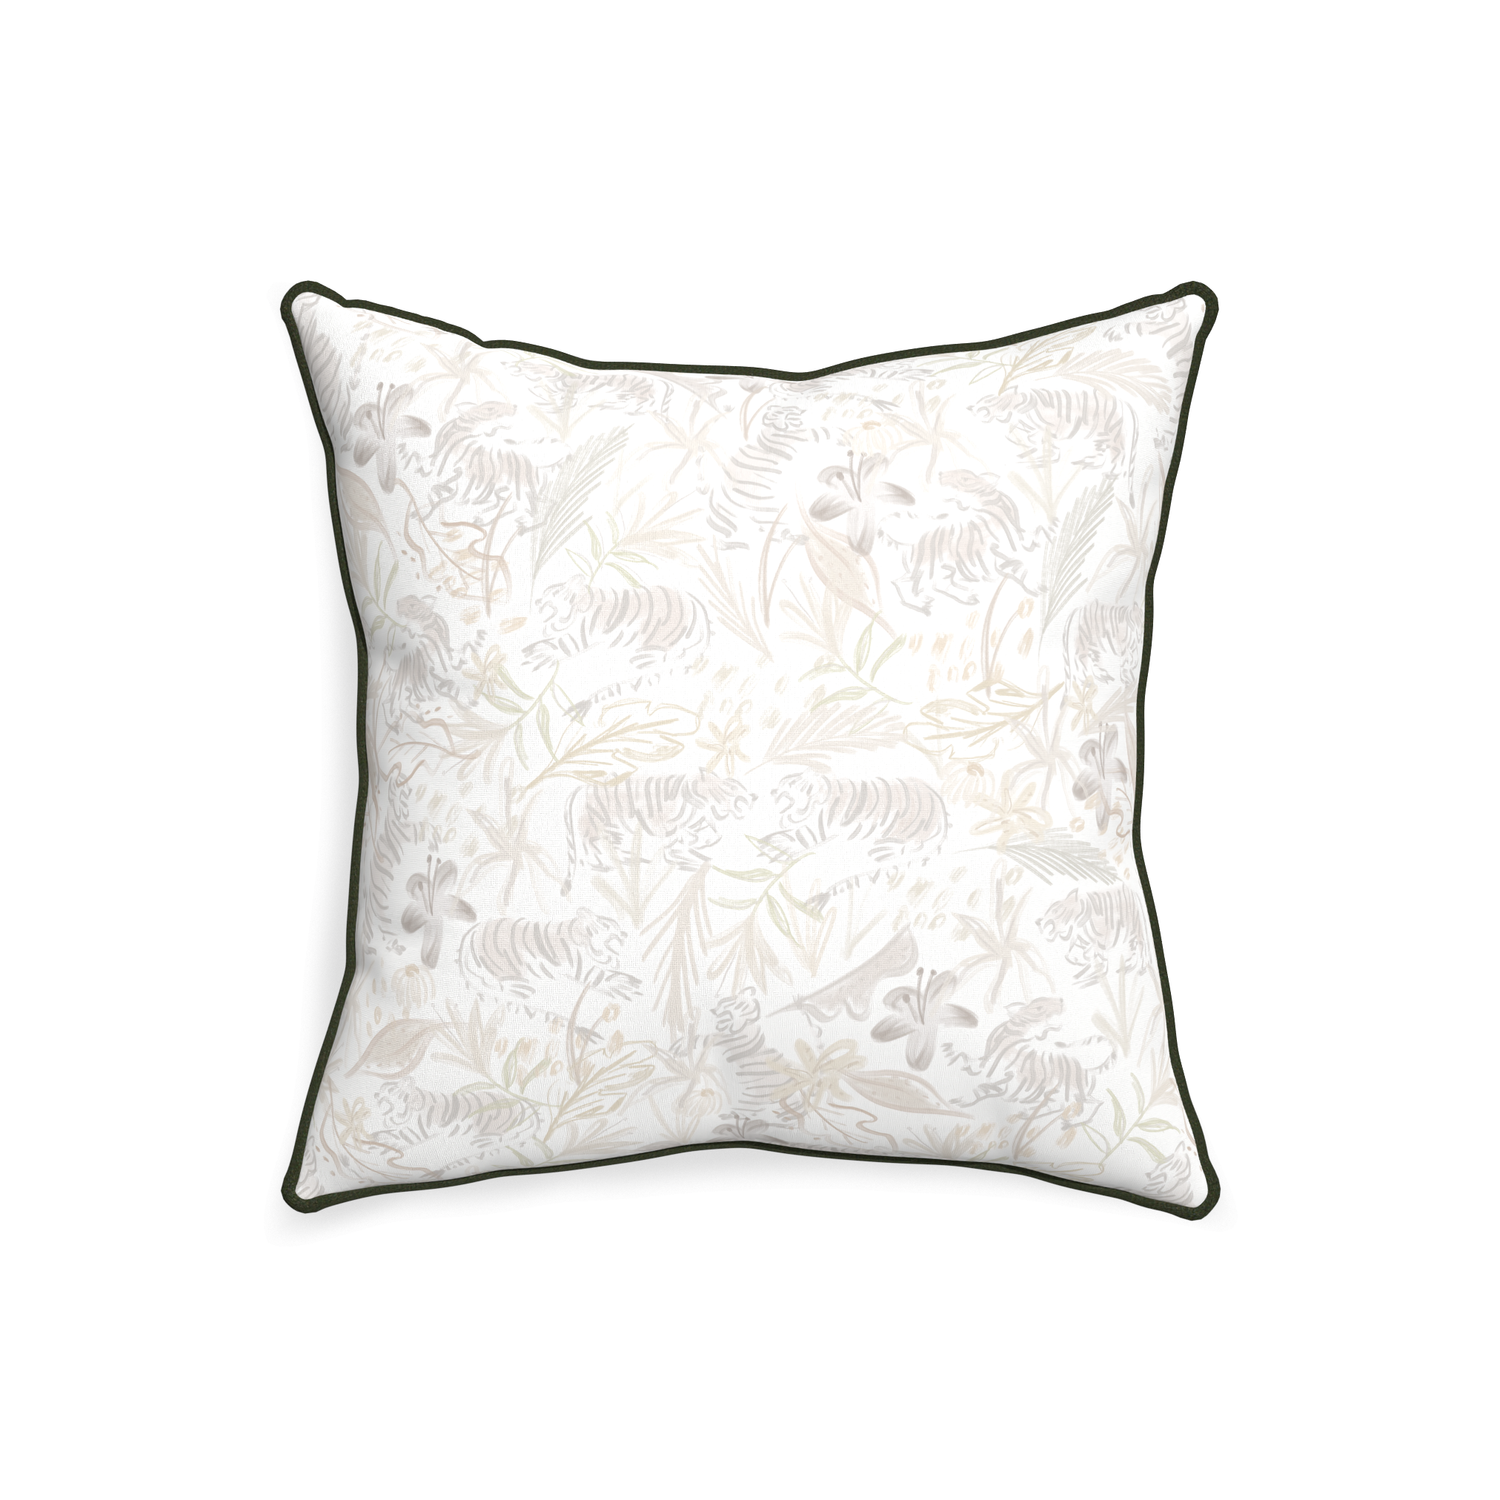 20-square frida sand custom beige chinoiserie tigerpillow with f piping on white background